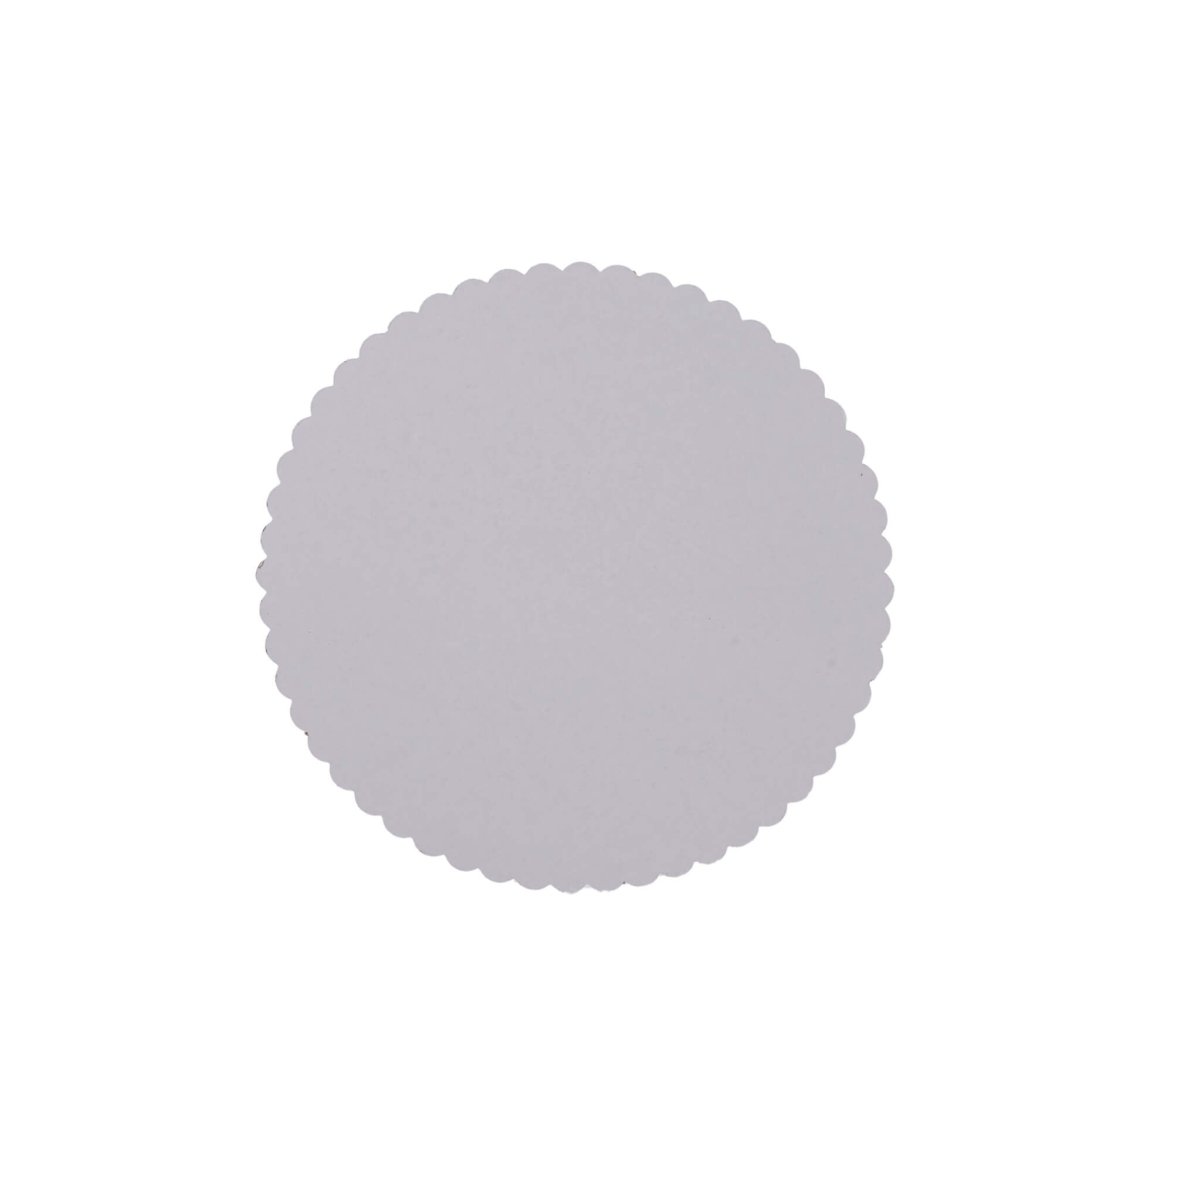 White Round Cake Board 5 Pieces - hotpackwebstore.com - Baking & Decoration